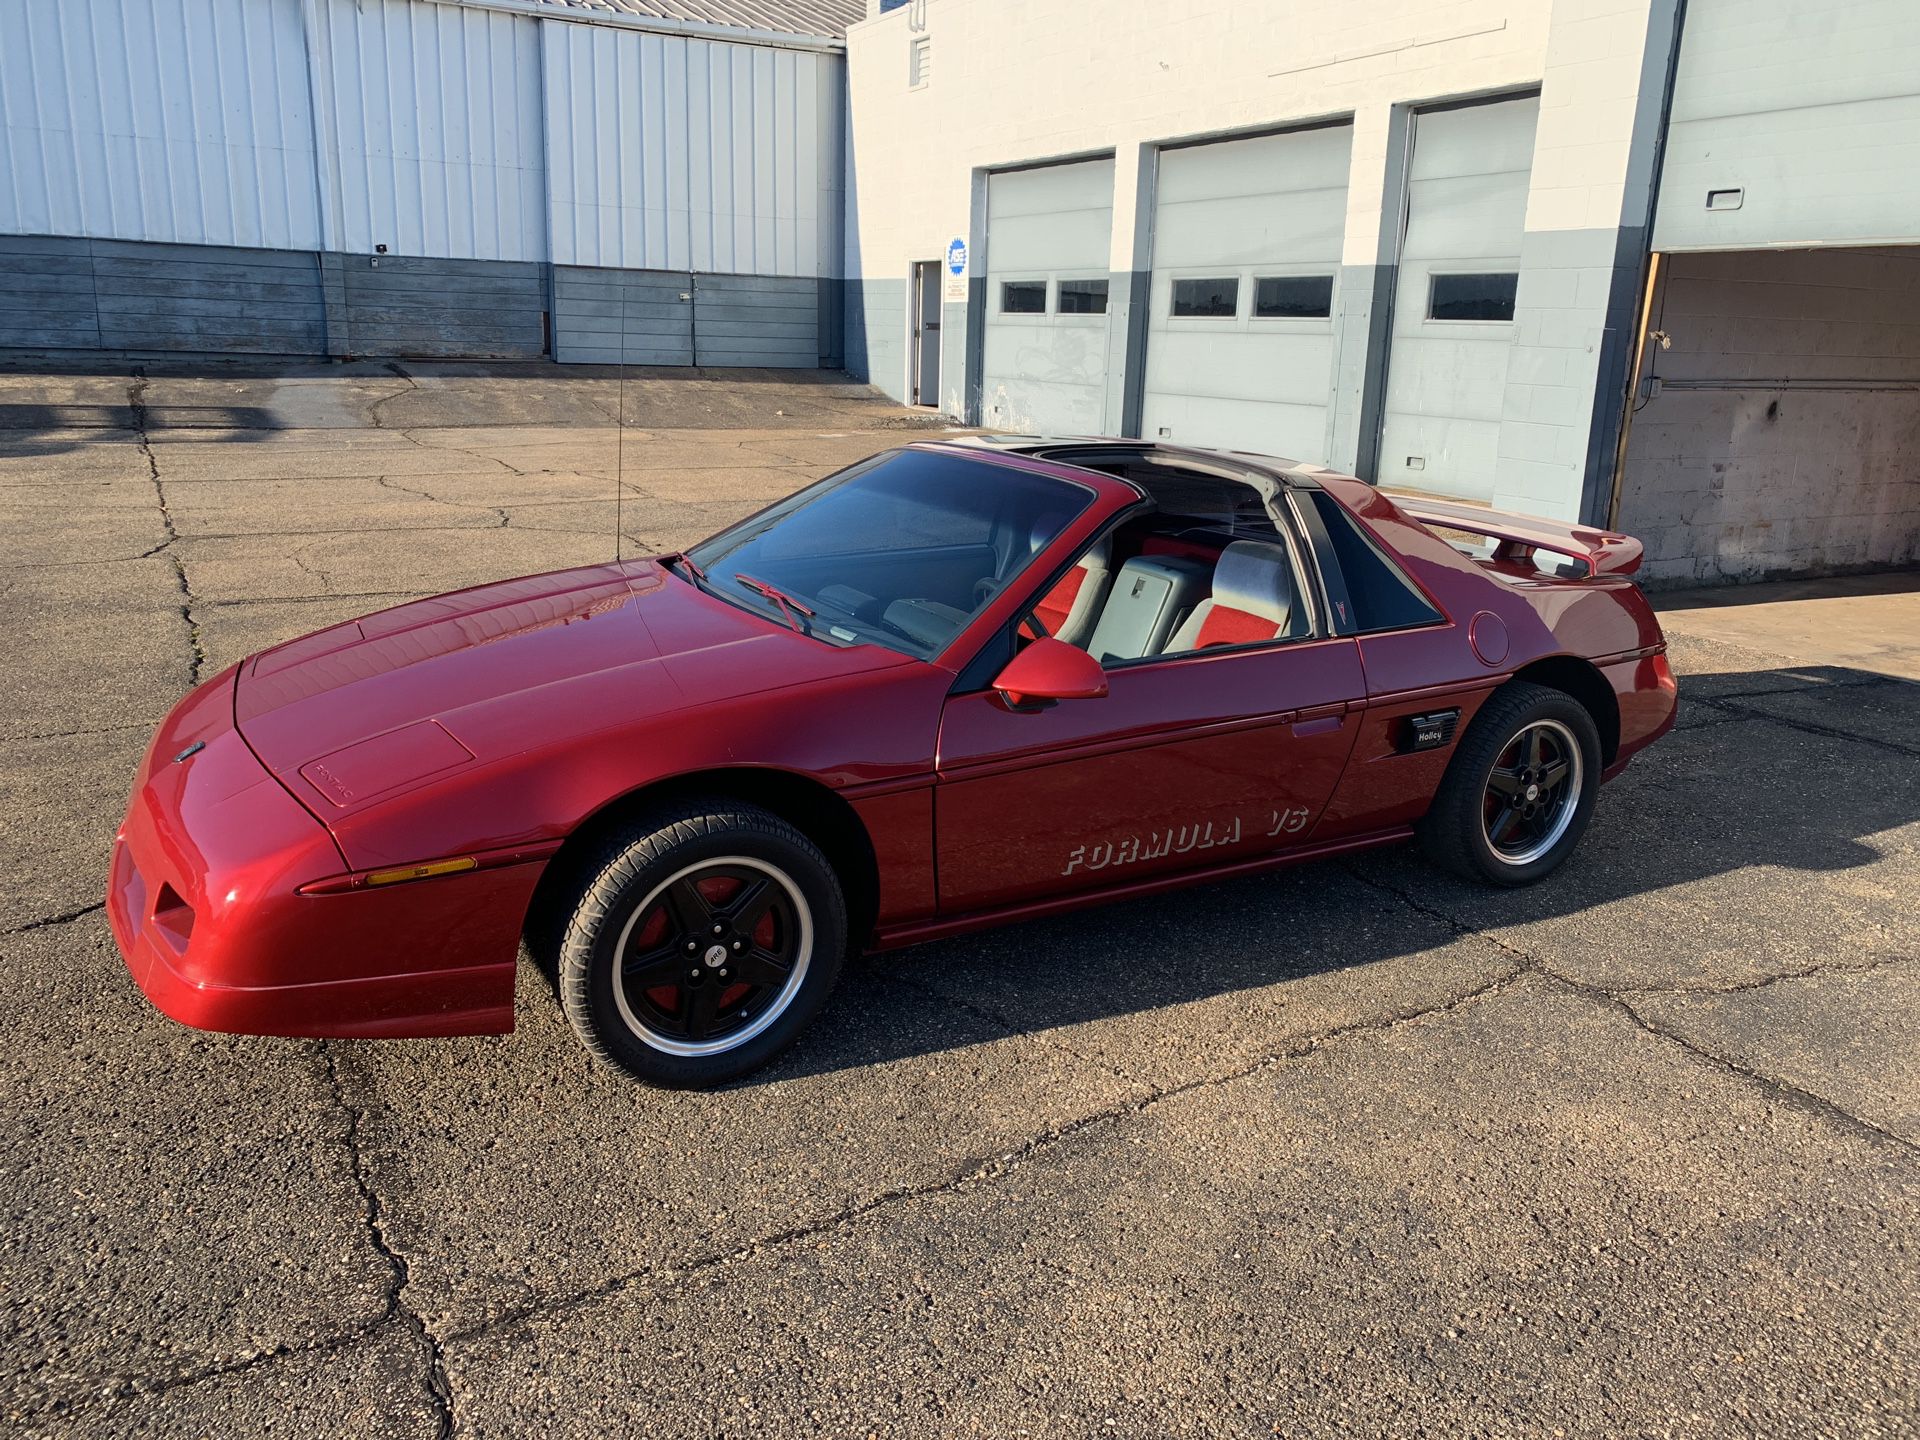 1988 Pontiac Fiero Formula T-Top. 1 of 299. V-6 Automatic. Tilt cruise great sounding stereo. 36,888 miles. Very rare. $10,000.